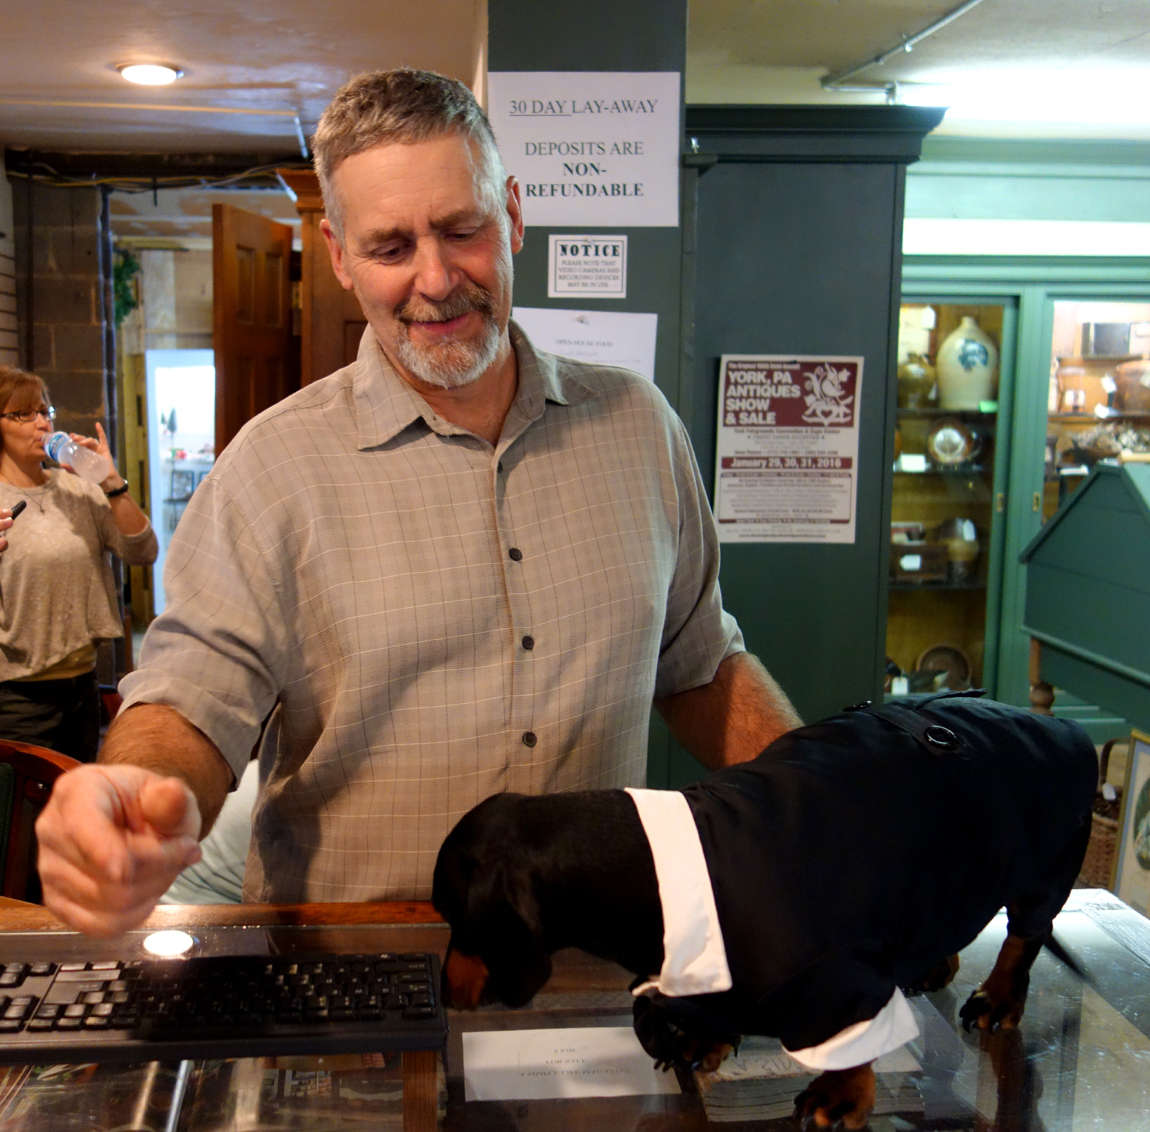 Greg Mummert, owner of Ivy Hall, with his constant companion, Ollie, formally dressed for the open house.